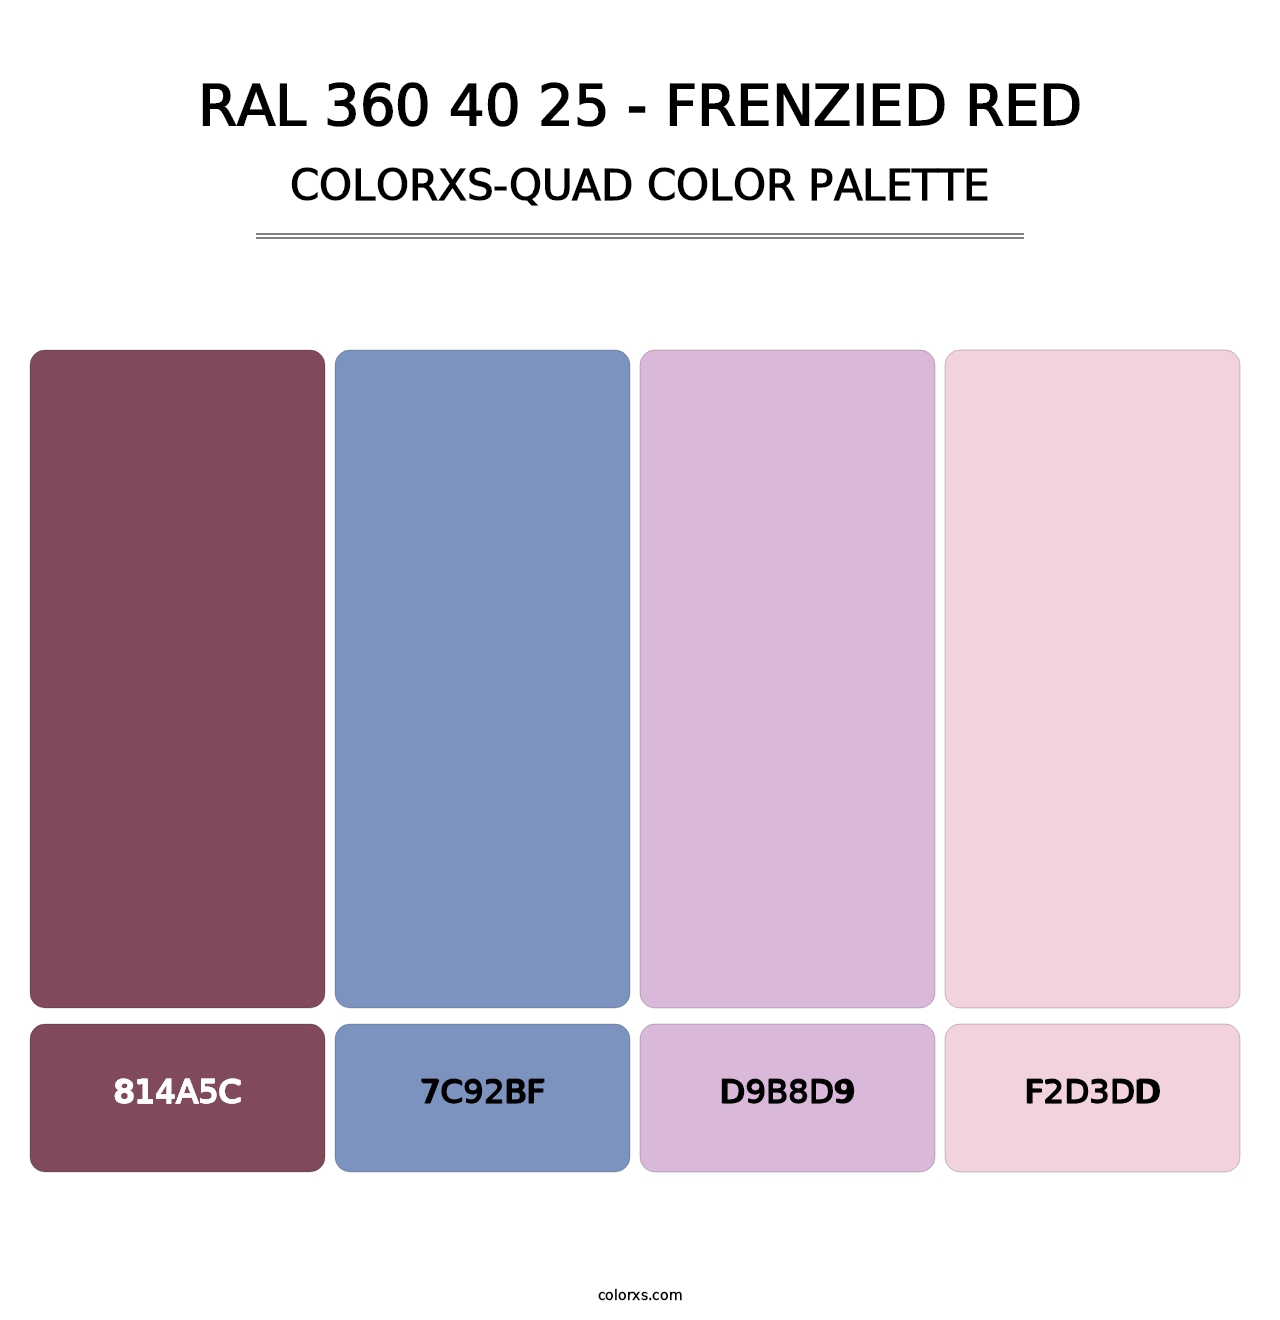 RAL 360 40 25 - Frenzied Red - Colorxs Quad Palette